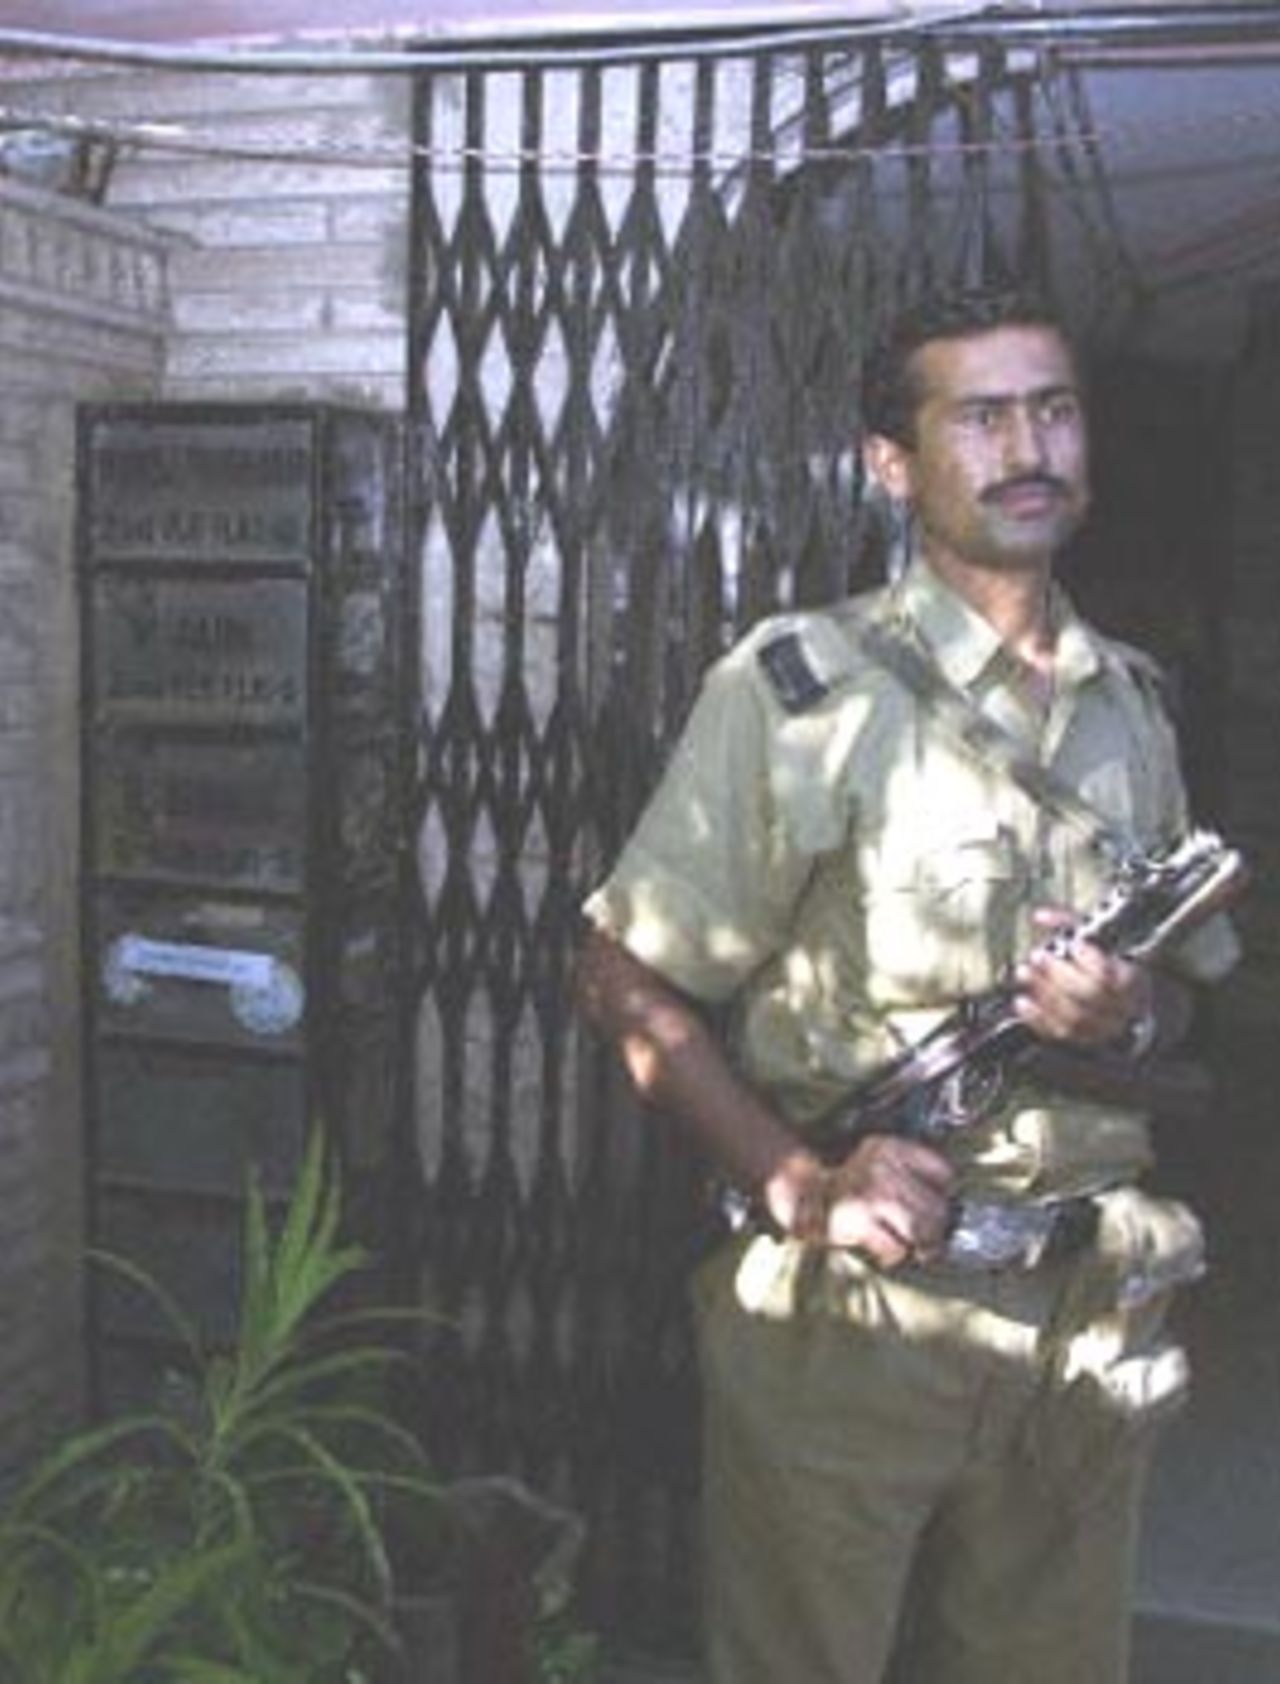 A Delhi police officer stands guard in front of the flat of former cricketer Manoj Prabhakar during a raid by income tax officials. Income tax officials have raided the homes of top Indian cricket players around the country, threatening a fresh scandal in a sport already laid low by match-fixing charges.